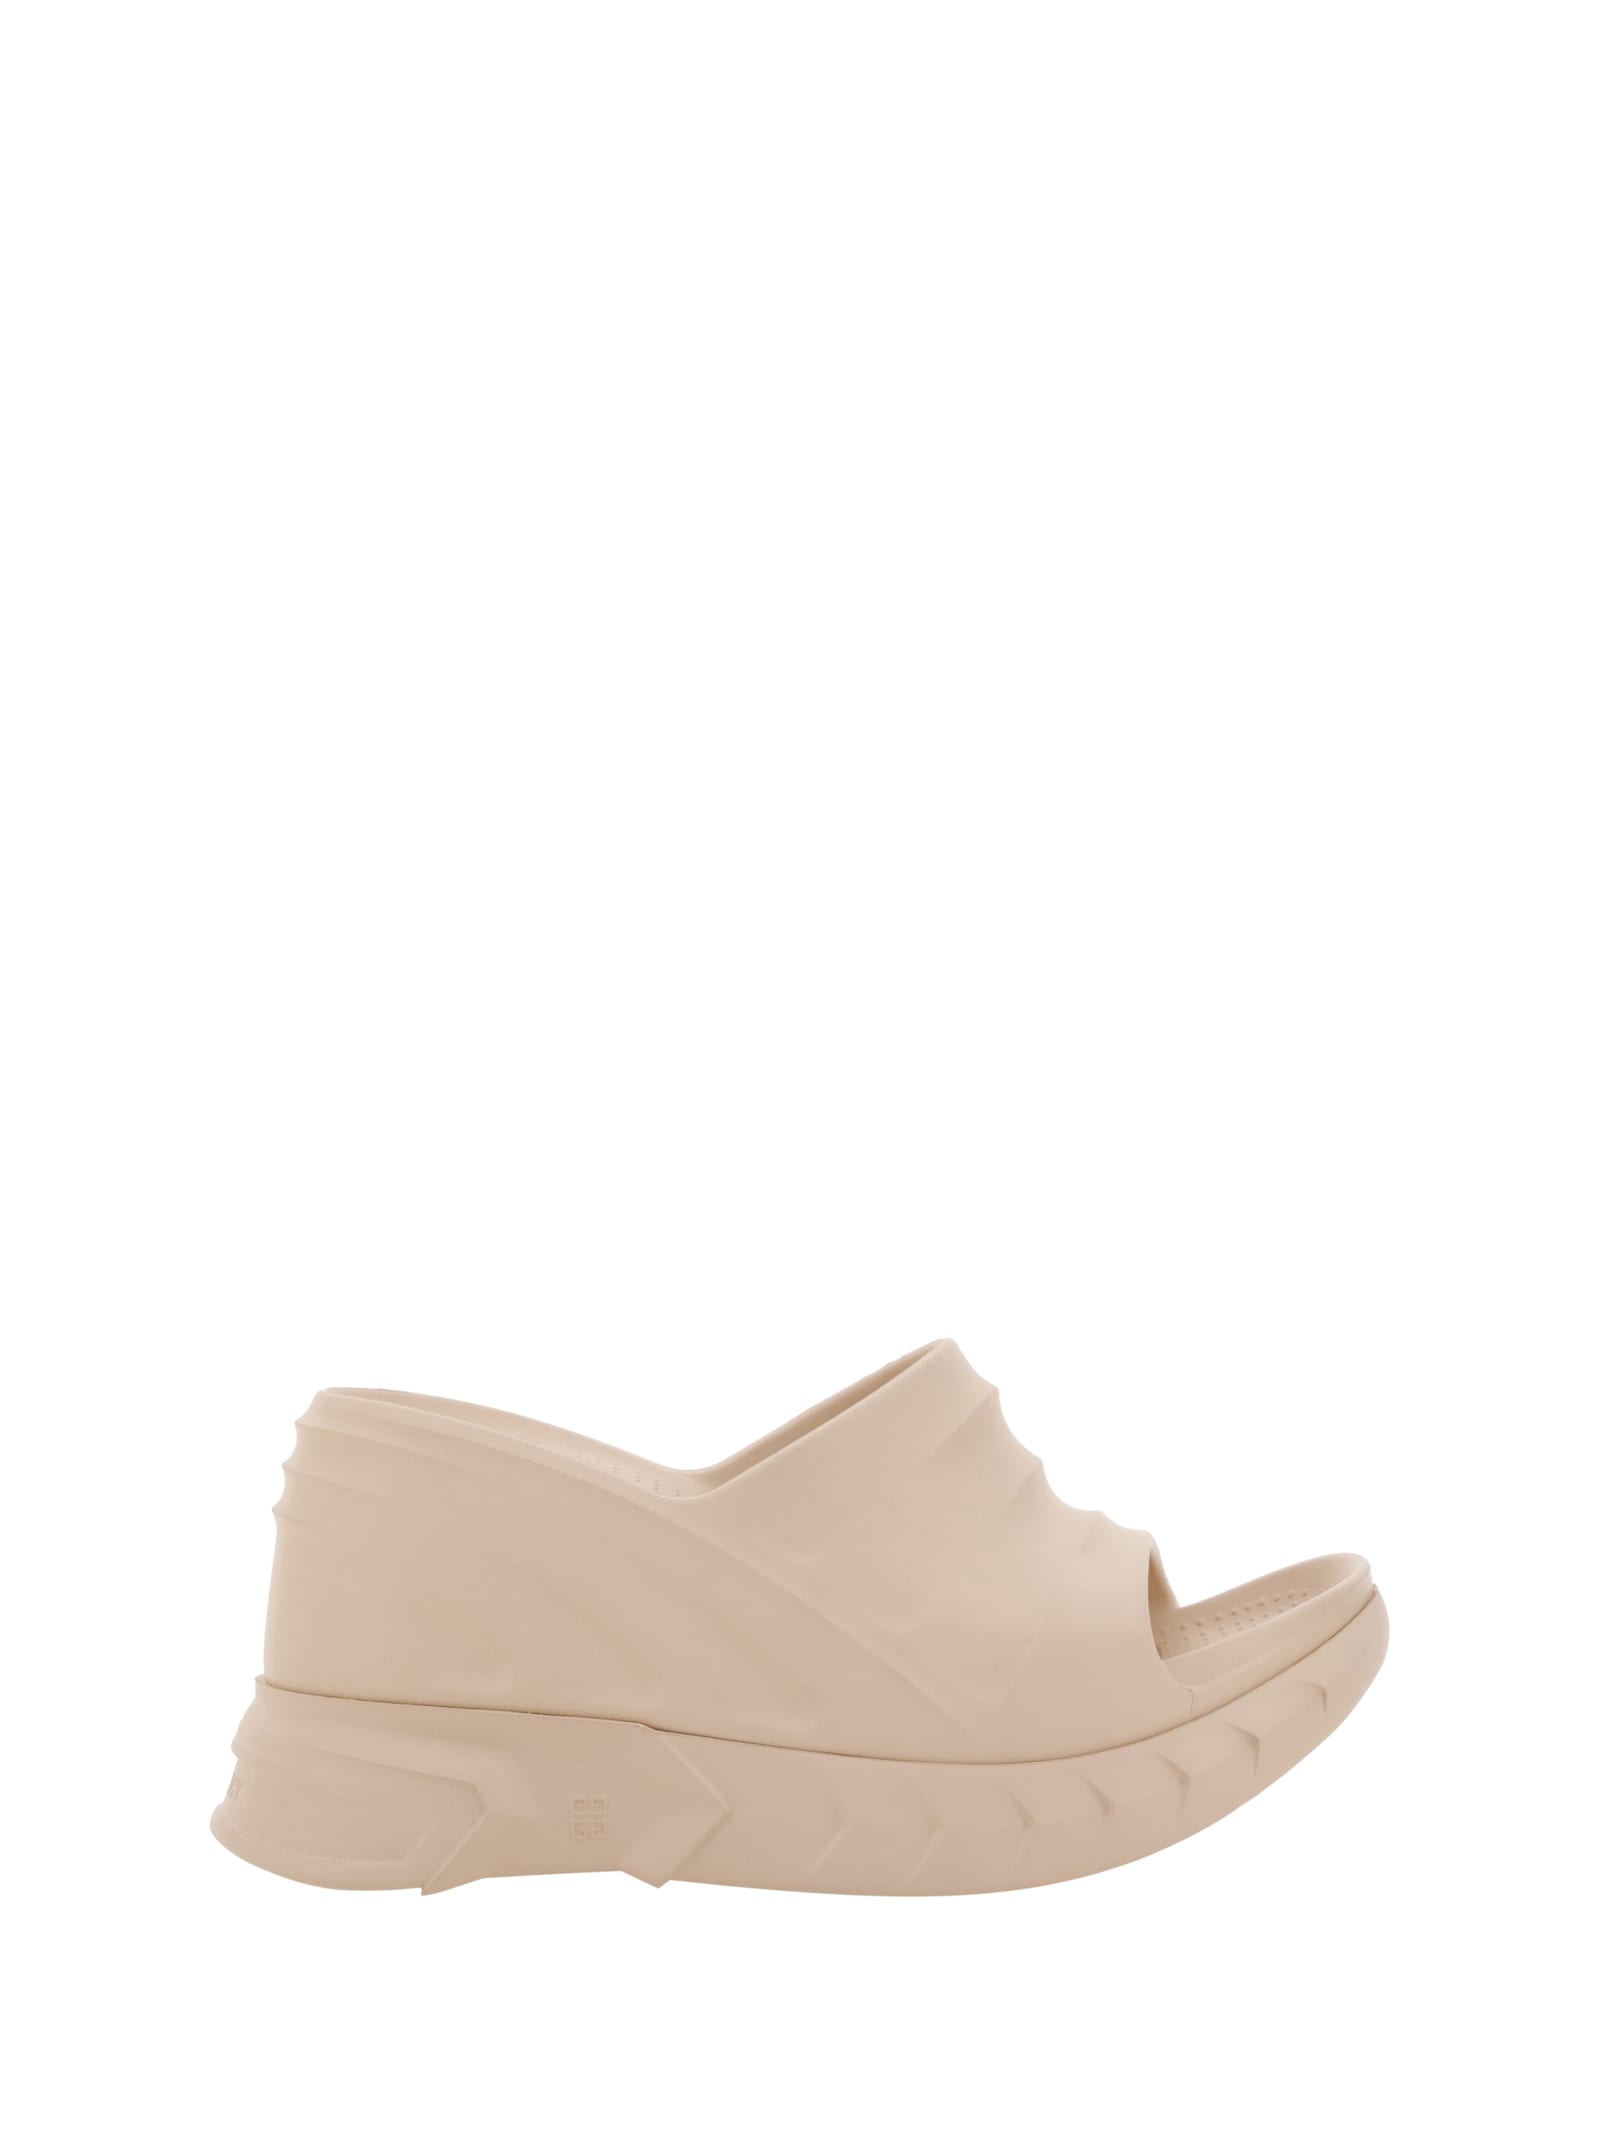 GIVENCHY MARSHMALLOW SANDALS